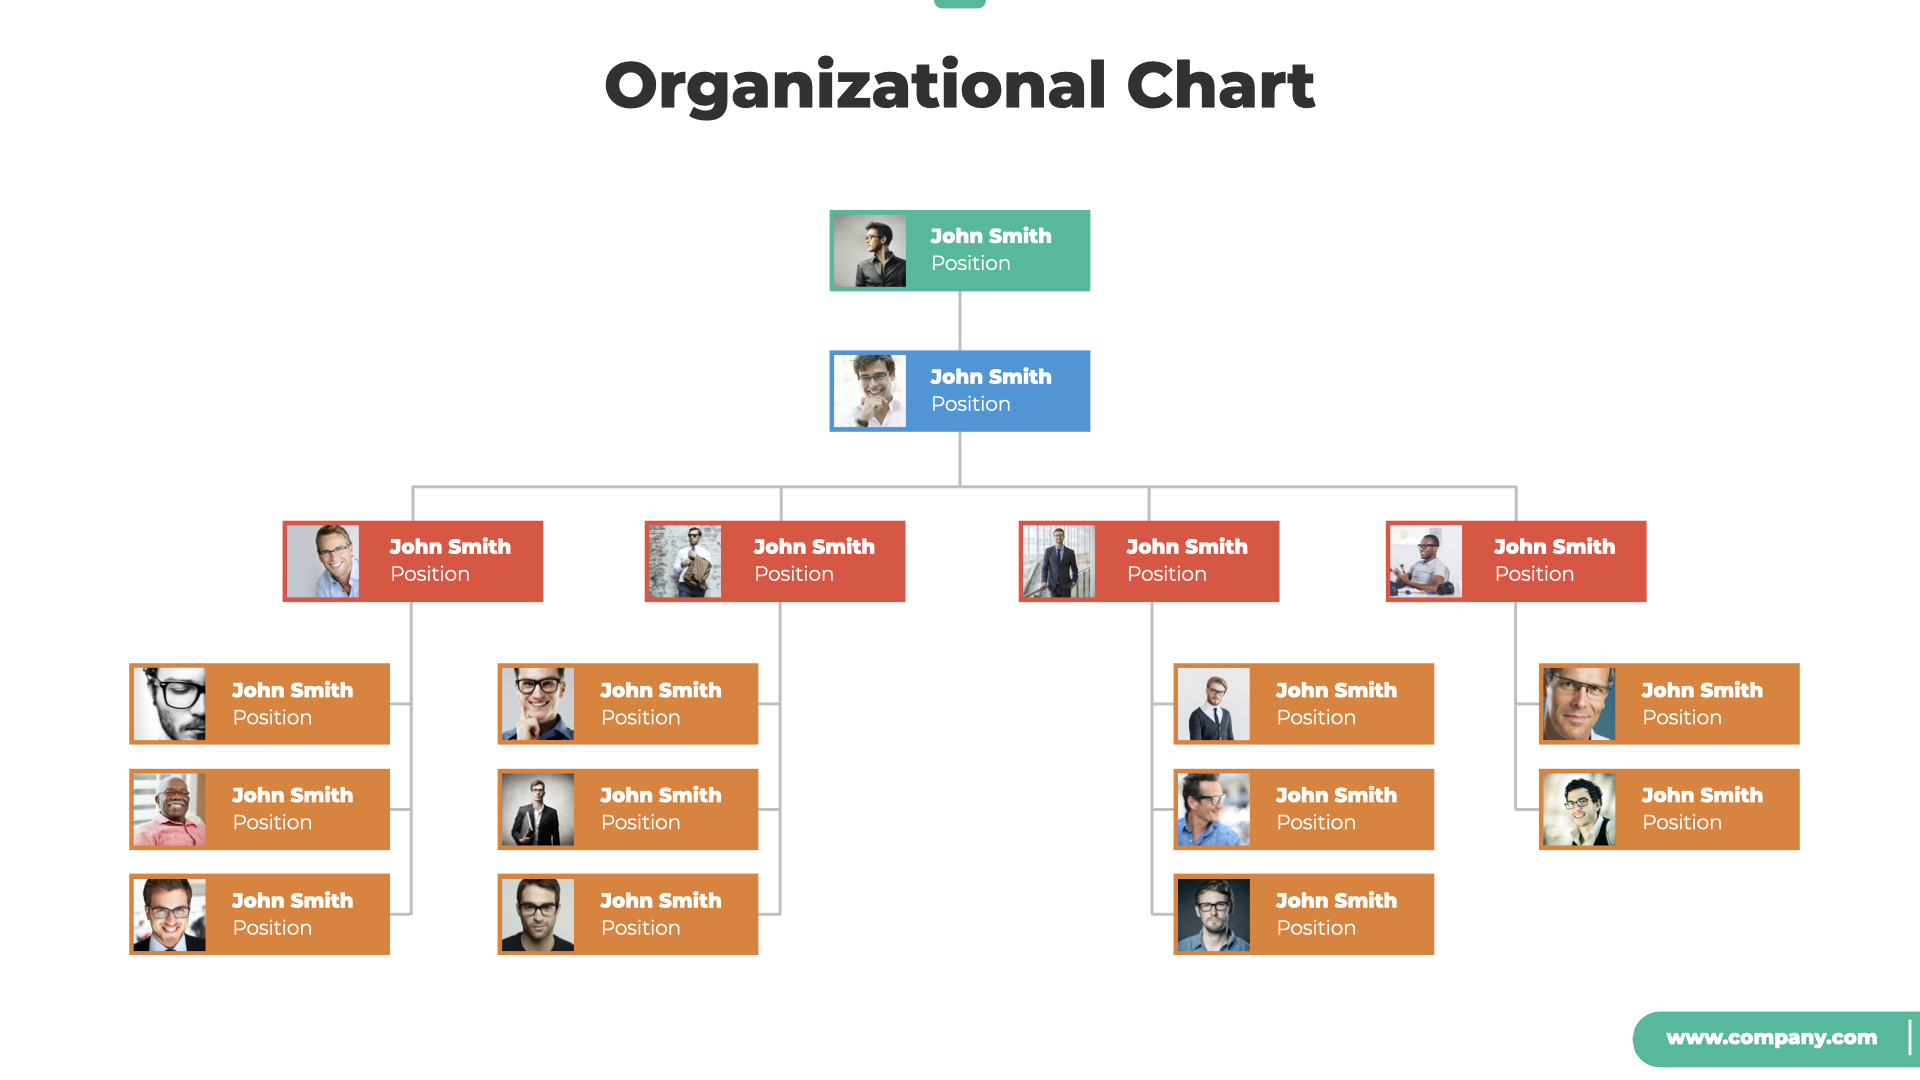 Organizational Chart and Hierarchy Keynote Template by Spriteit